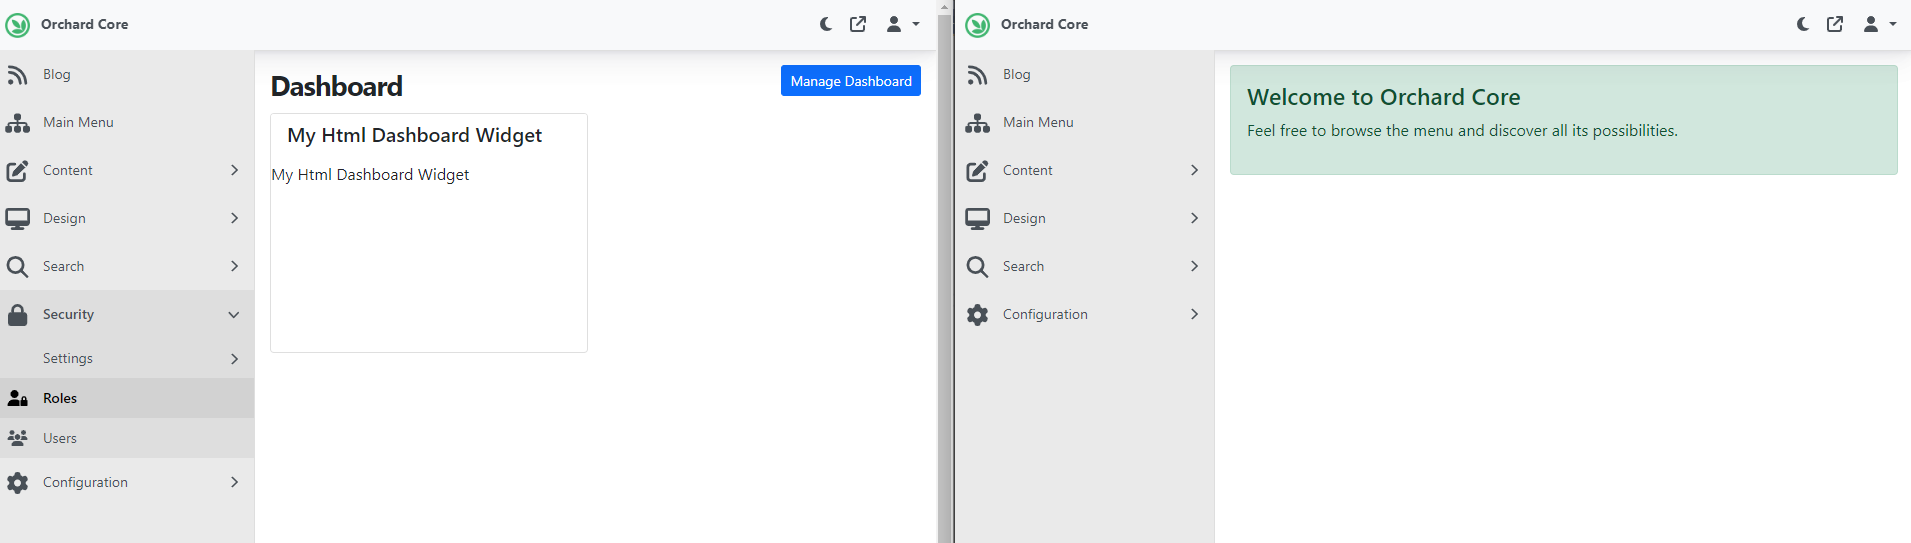 Show AdminDashboard shape when access admin dashboard is not granted